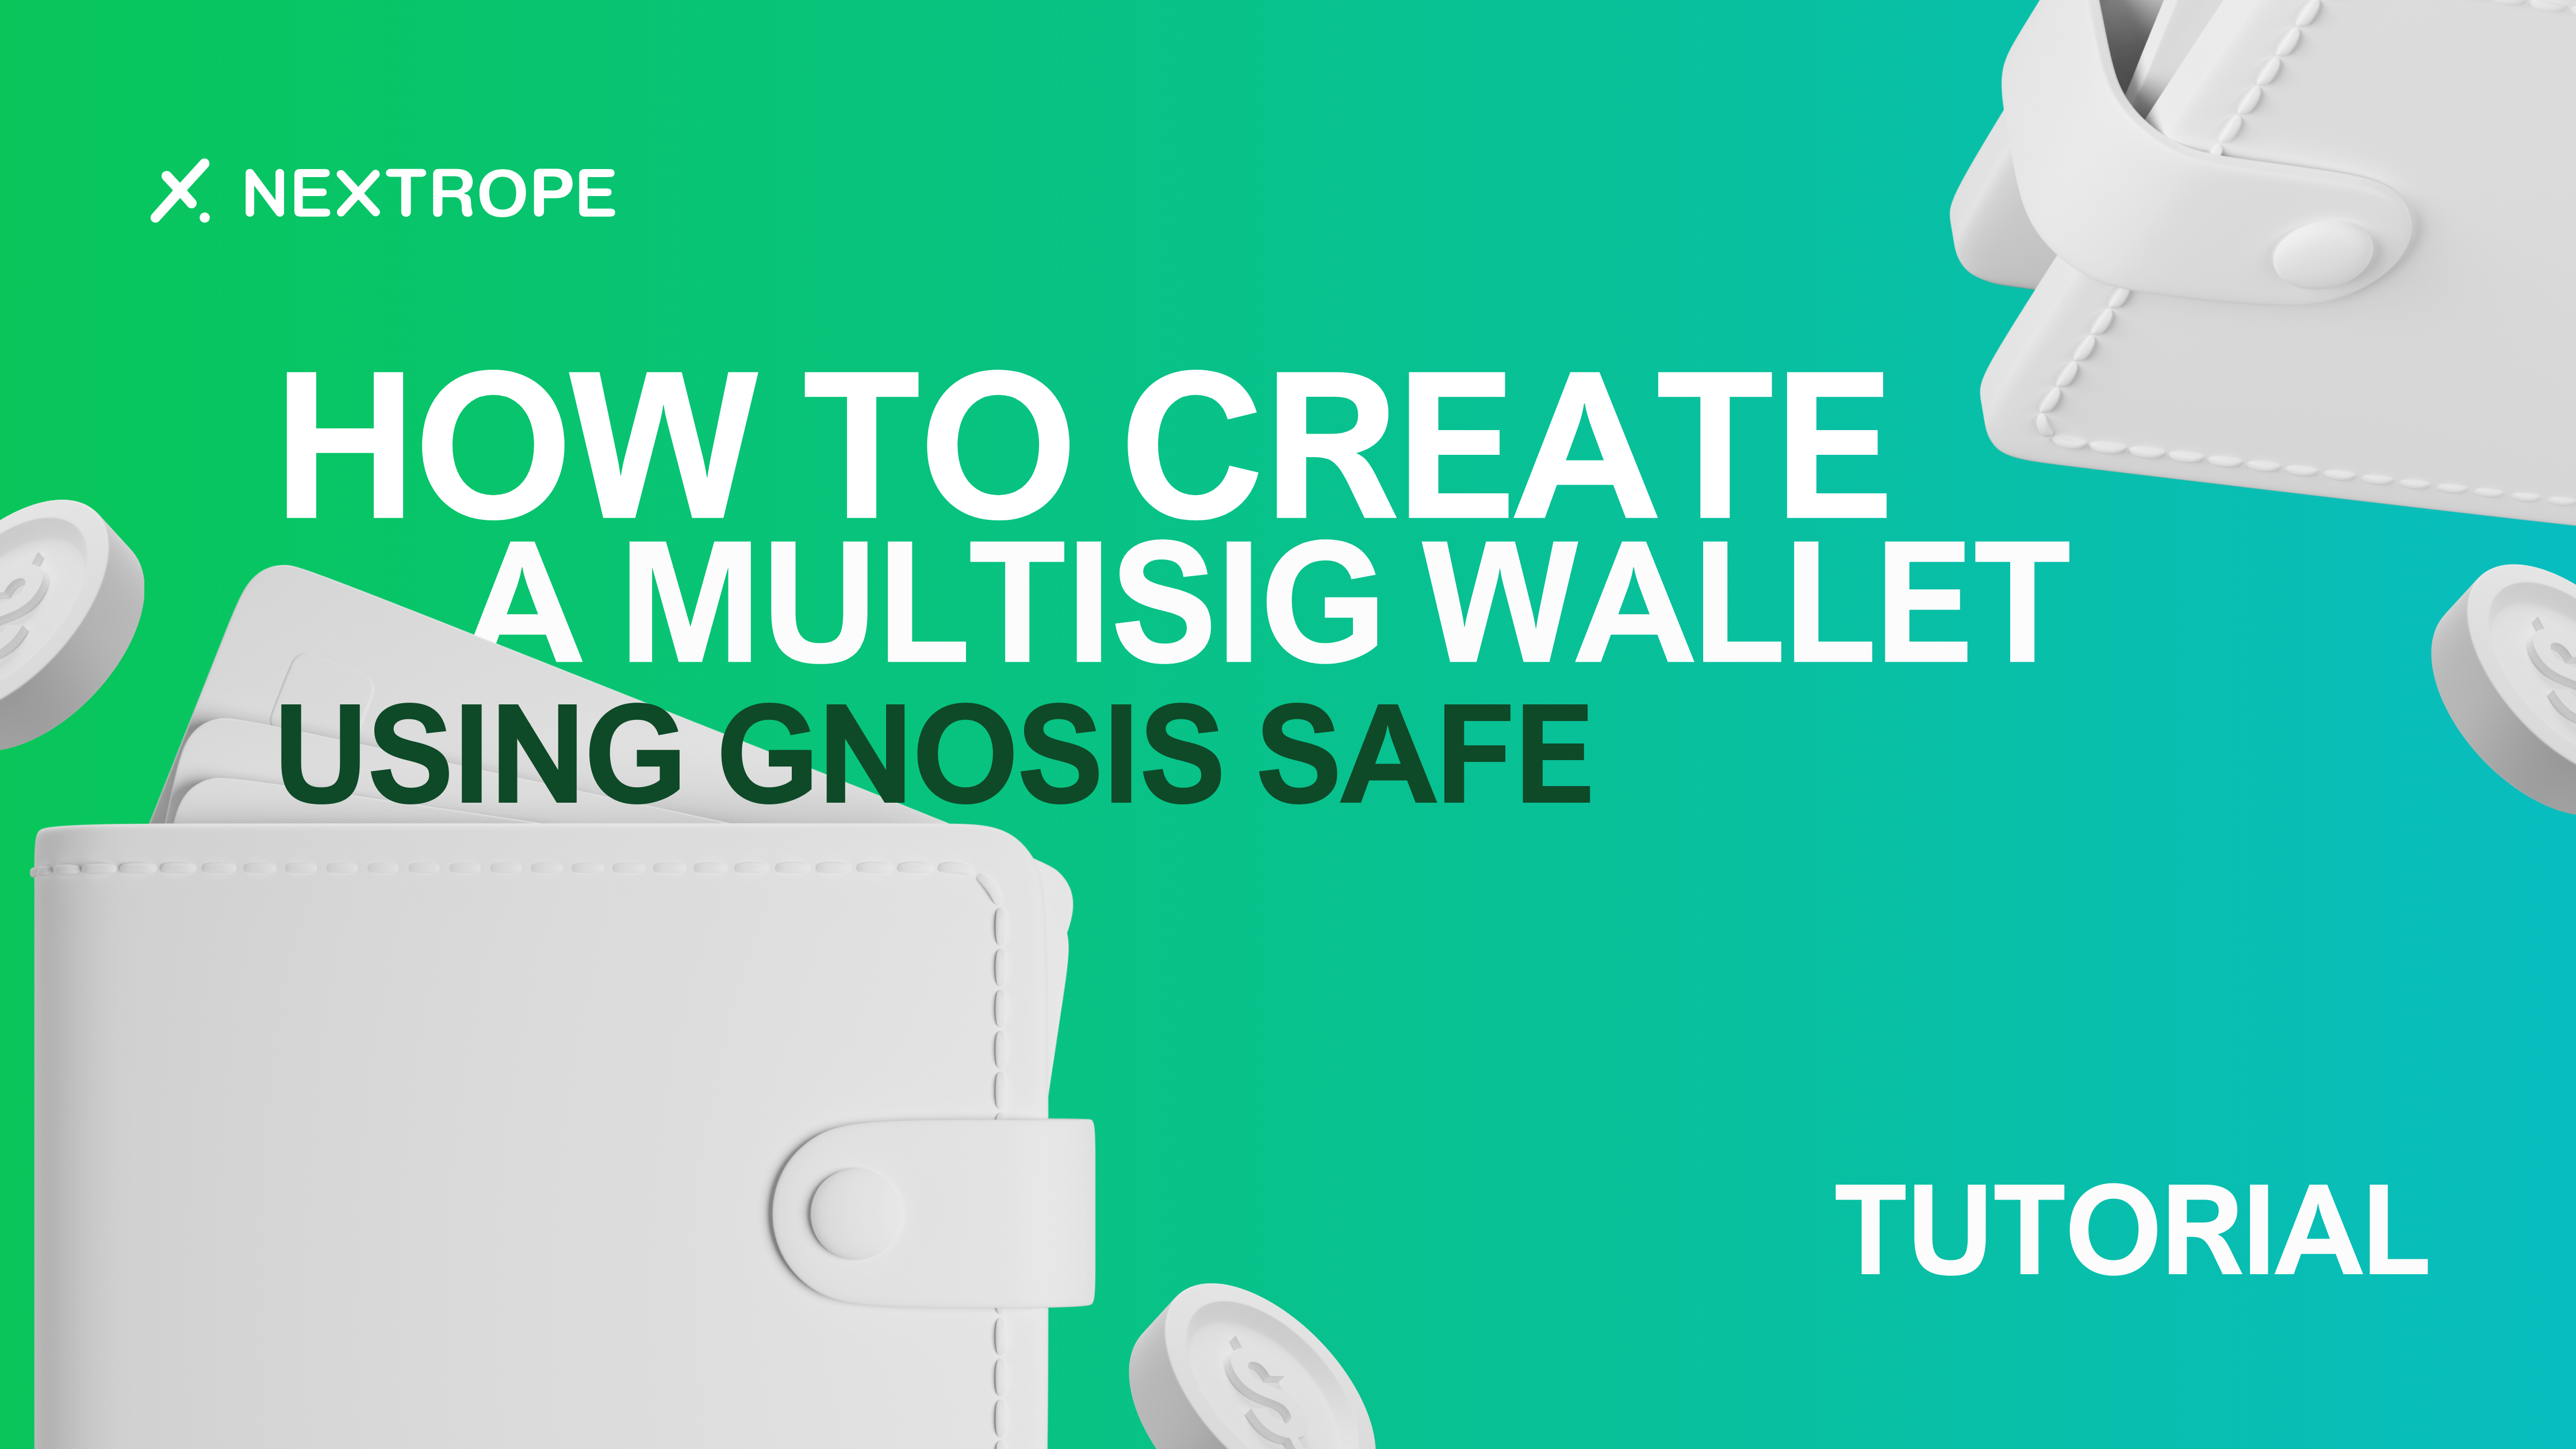 What is multisig wallet? A guide to using multisig wallets